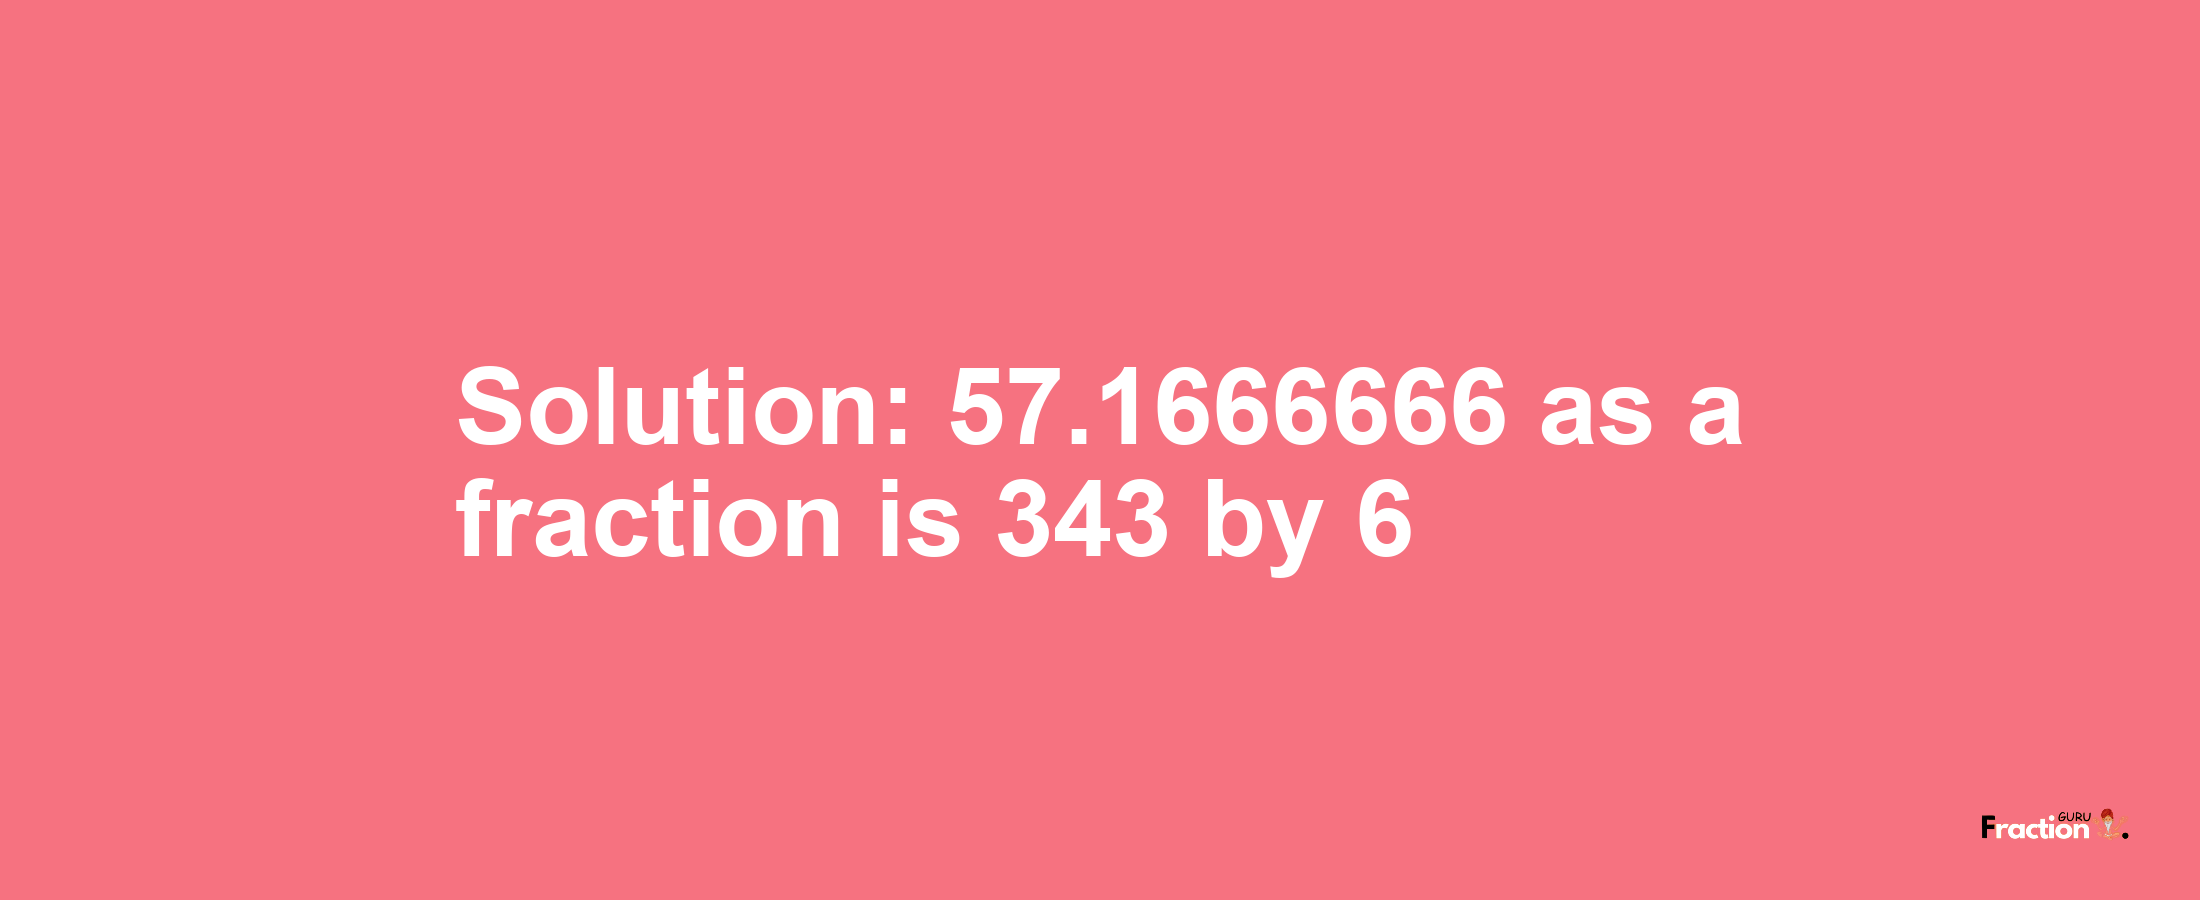 Solution:57.1666666 as a fraction is 343/6